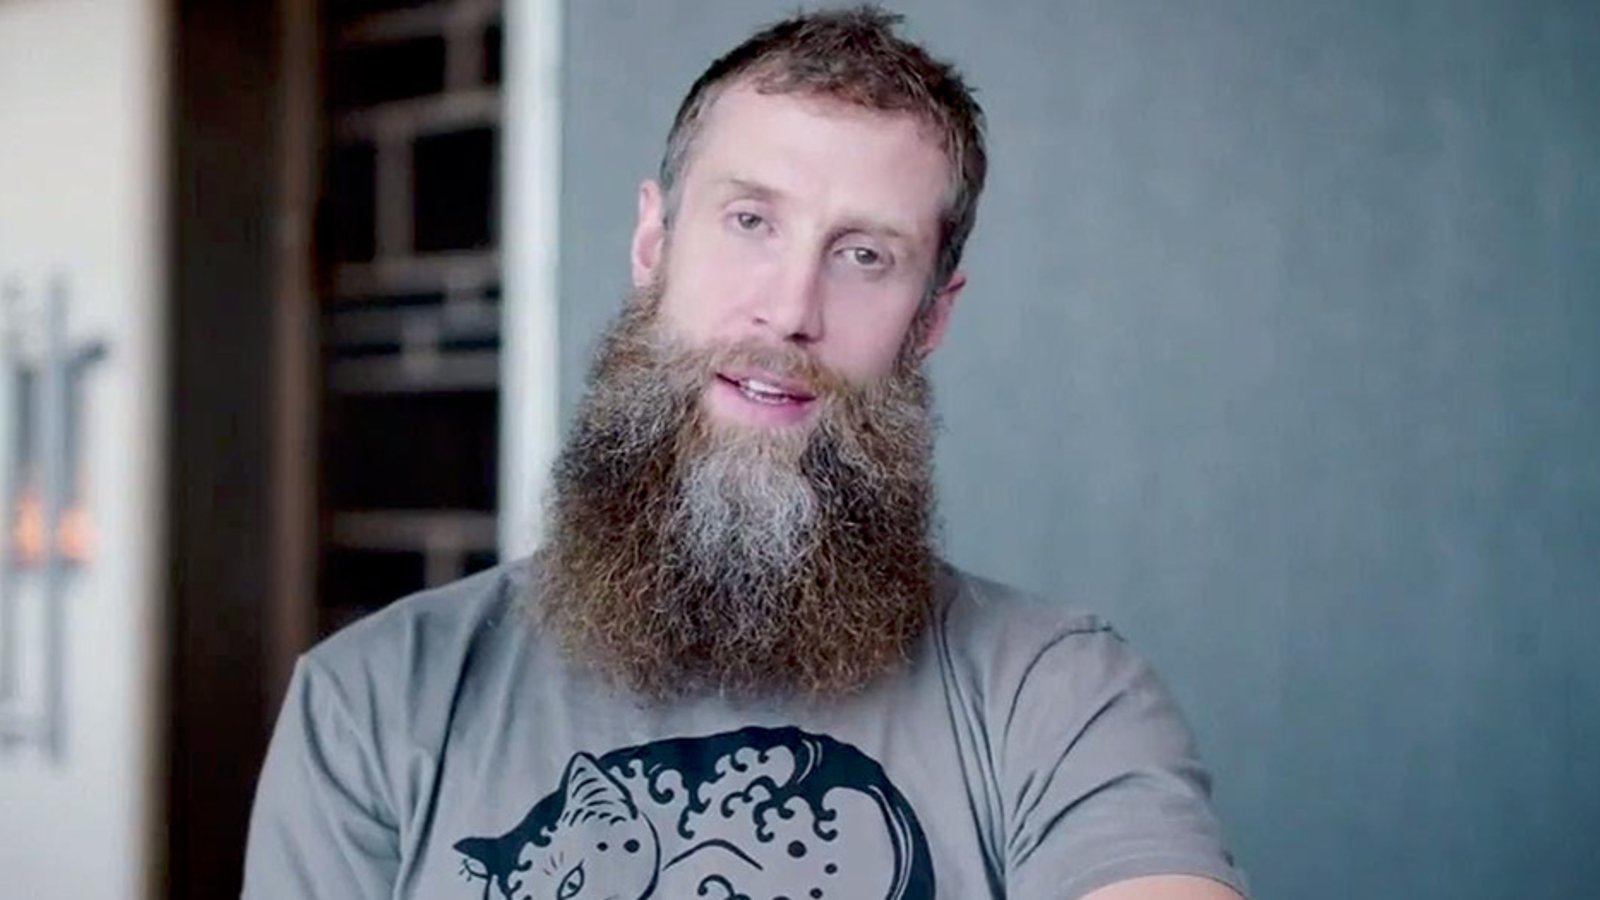 Joe Thornton addresses potential end of his Hall of Fame career 